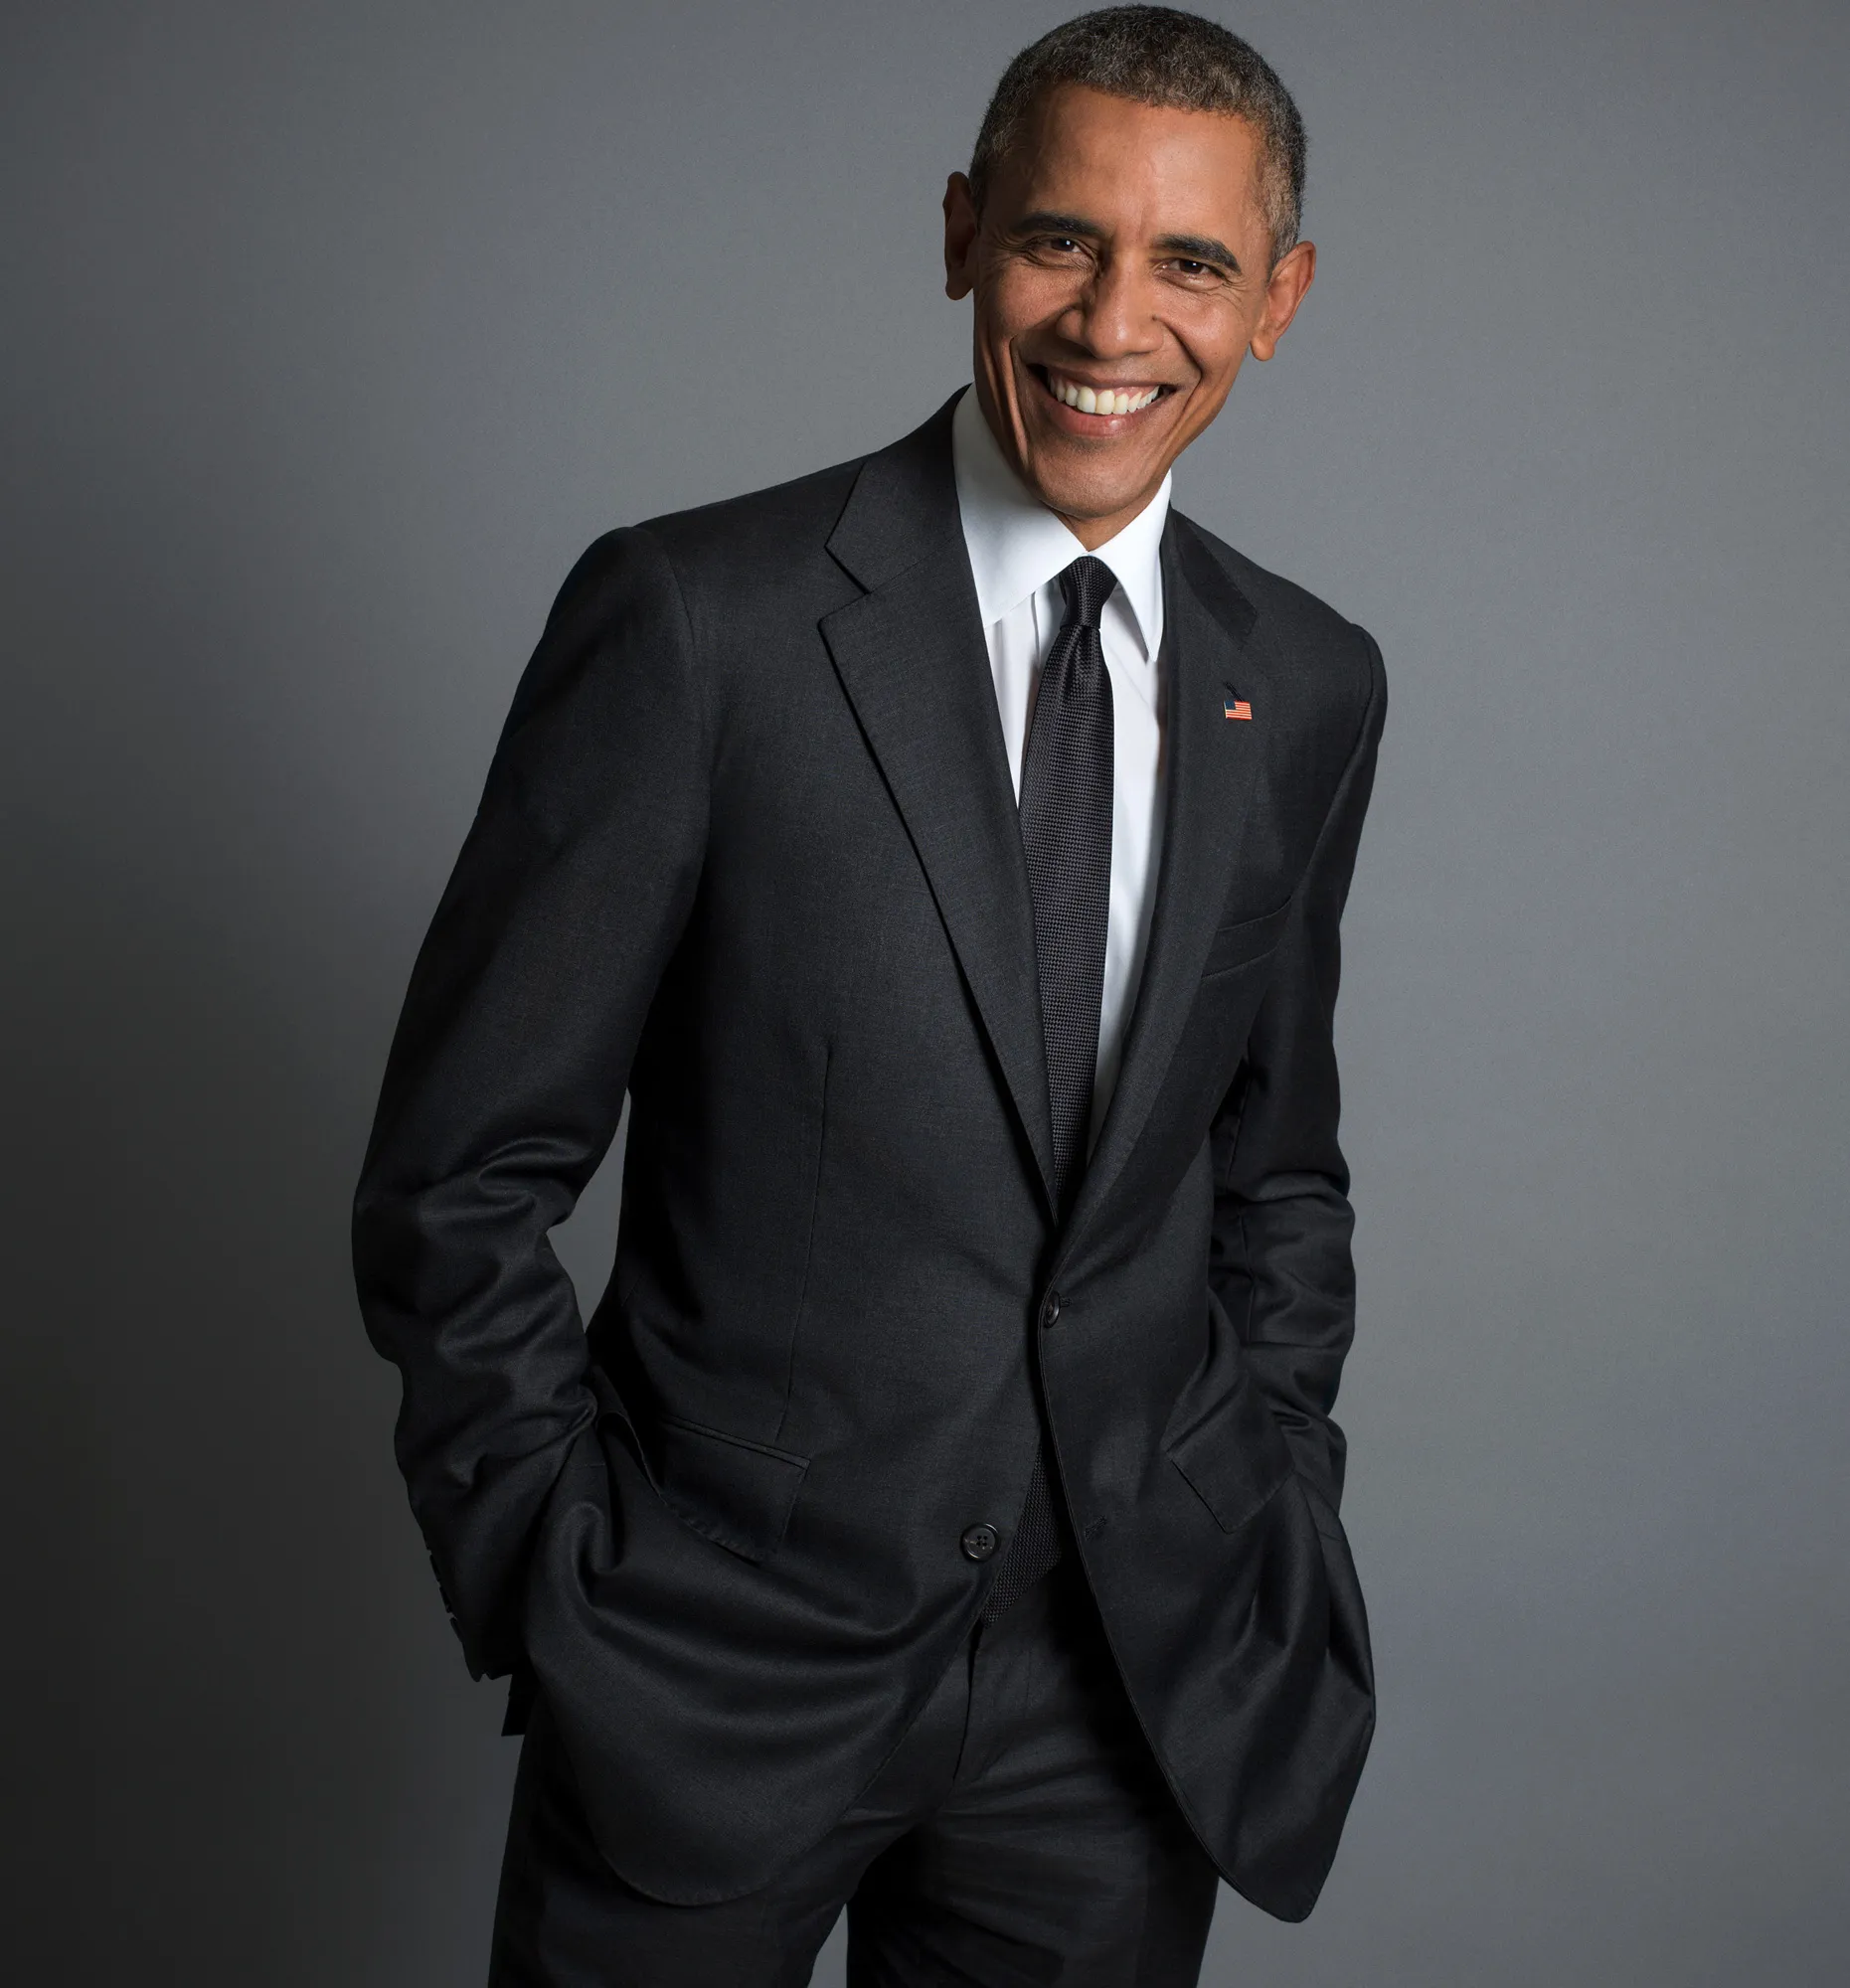 Barack Obama's Biography: Net Worth, Birthday, Wife, Children, Parents, Family, Sister, Education, Siblings, Wiki Facts And More..., Barack Obama&#8217;s Biography: Net Worth, Birthday, Wife, Children, Parents, Family, Sister, Education, Siblings, Wiki Facts And More&#8230;, INFINITY LOADED